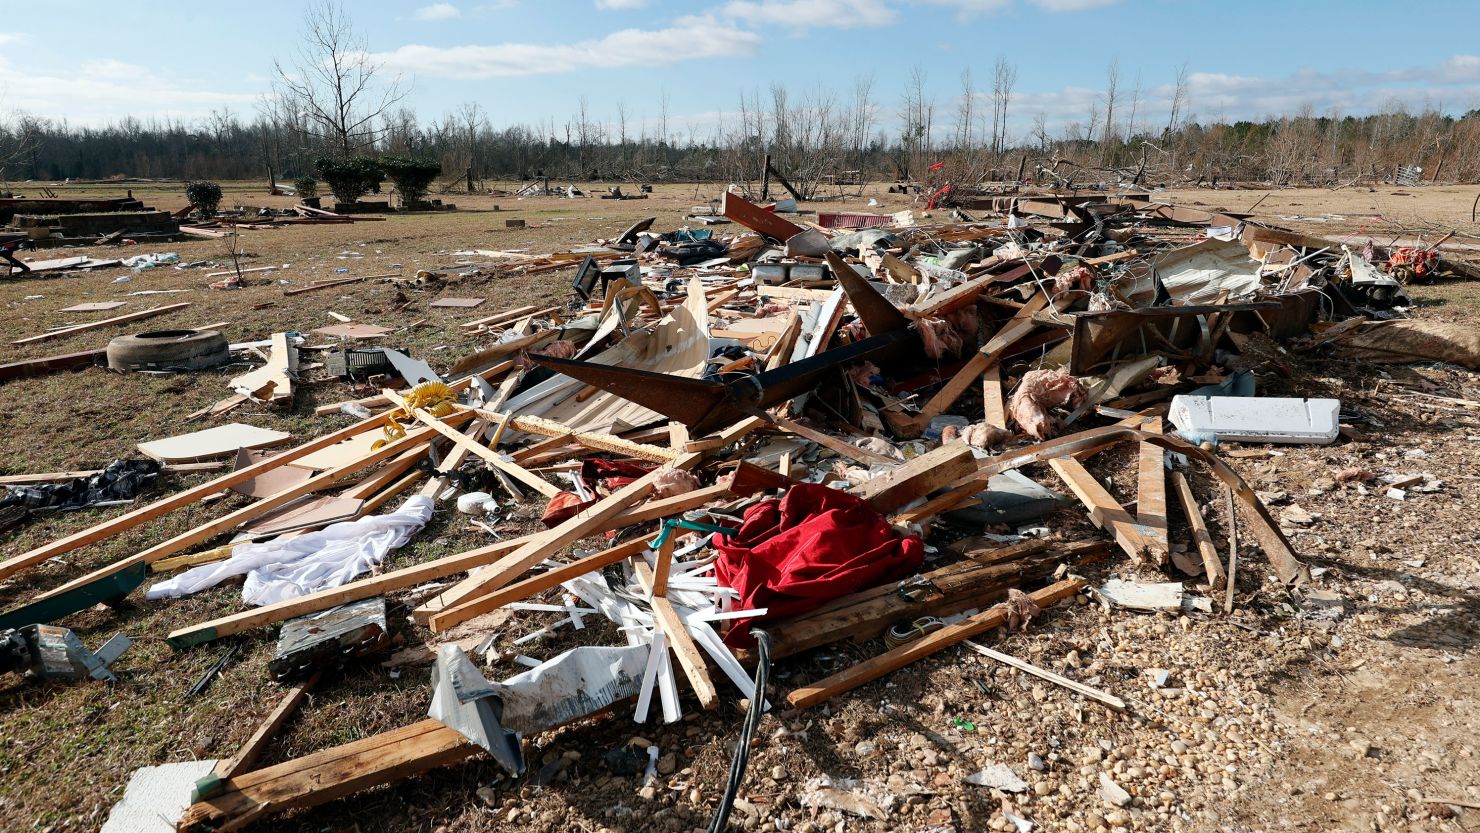 Debris from a tornado that ripped through Central Alabama last week is seen along County Road 140 on Saturday, January 14, in Autauga County, Alabama.